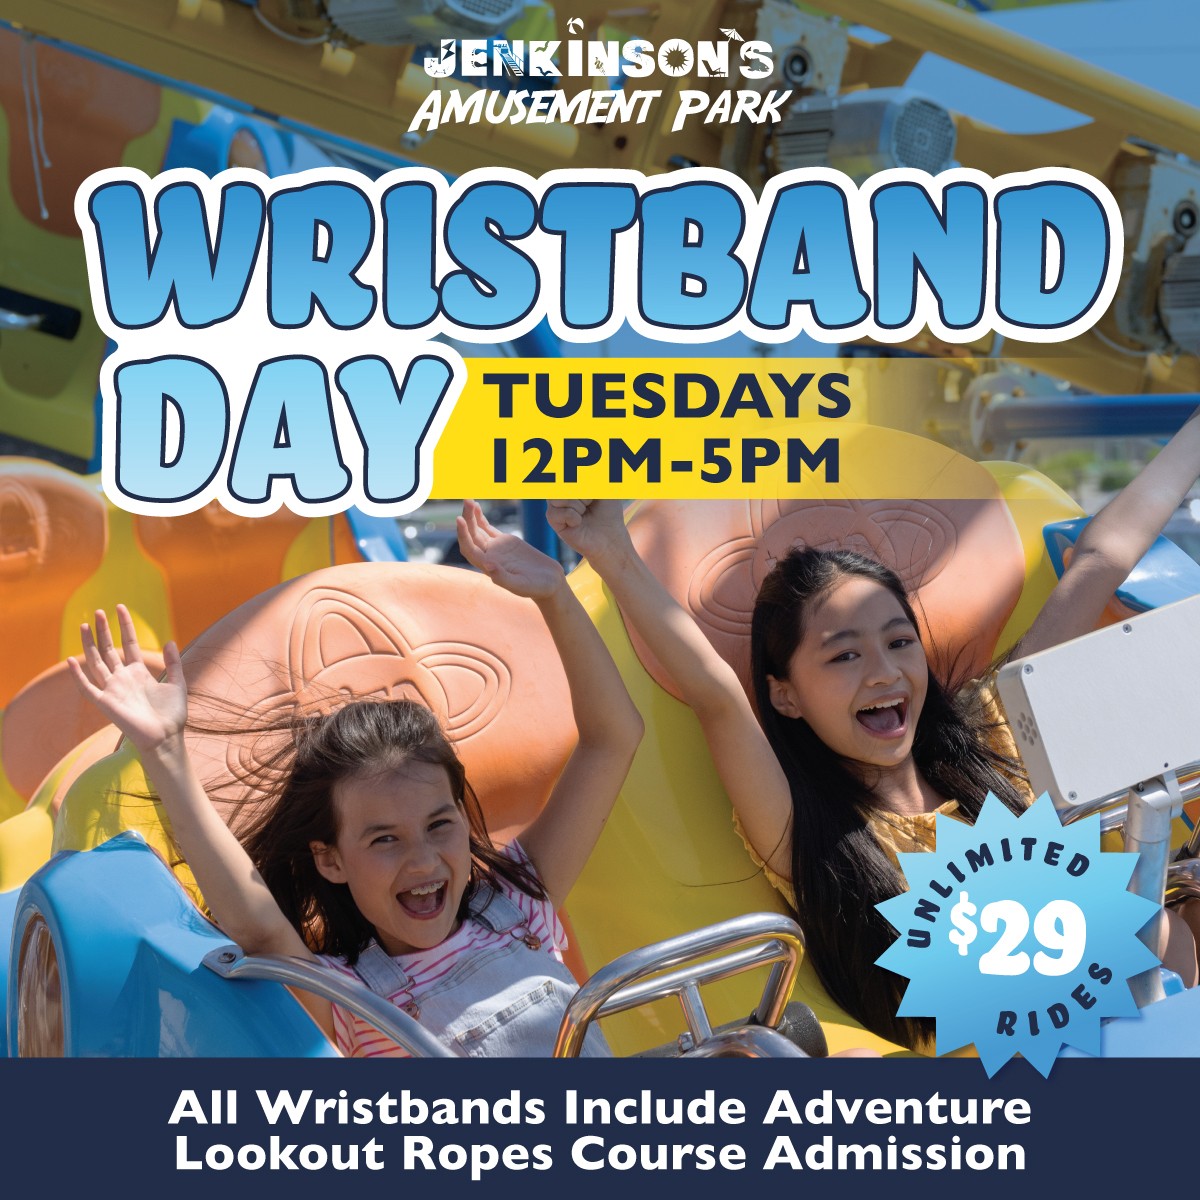 jenkinsons amusement park wristband day on tuesdays from 12-5pm